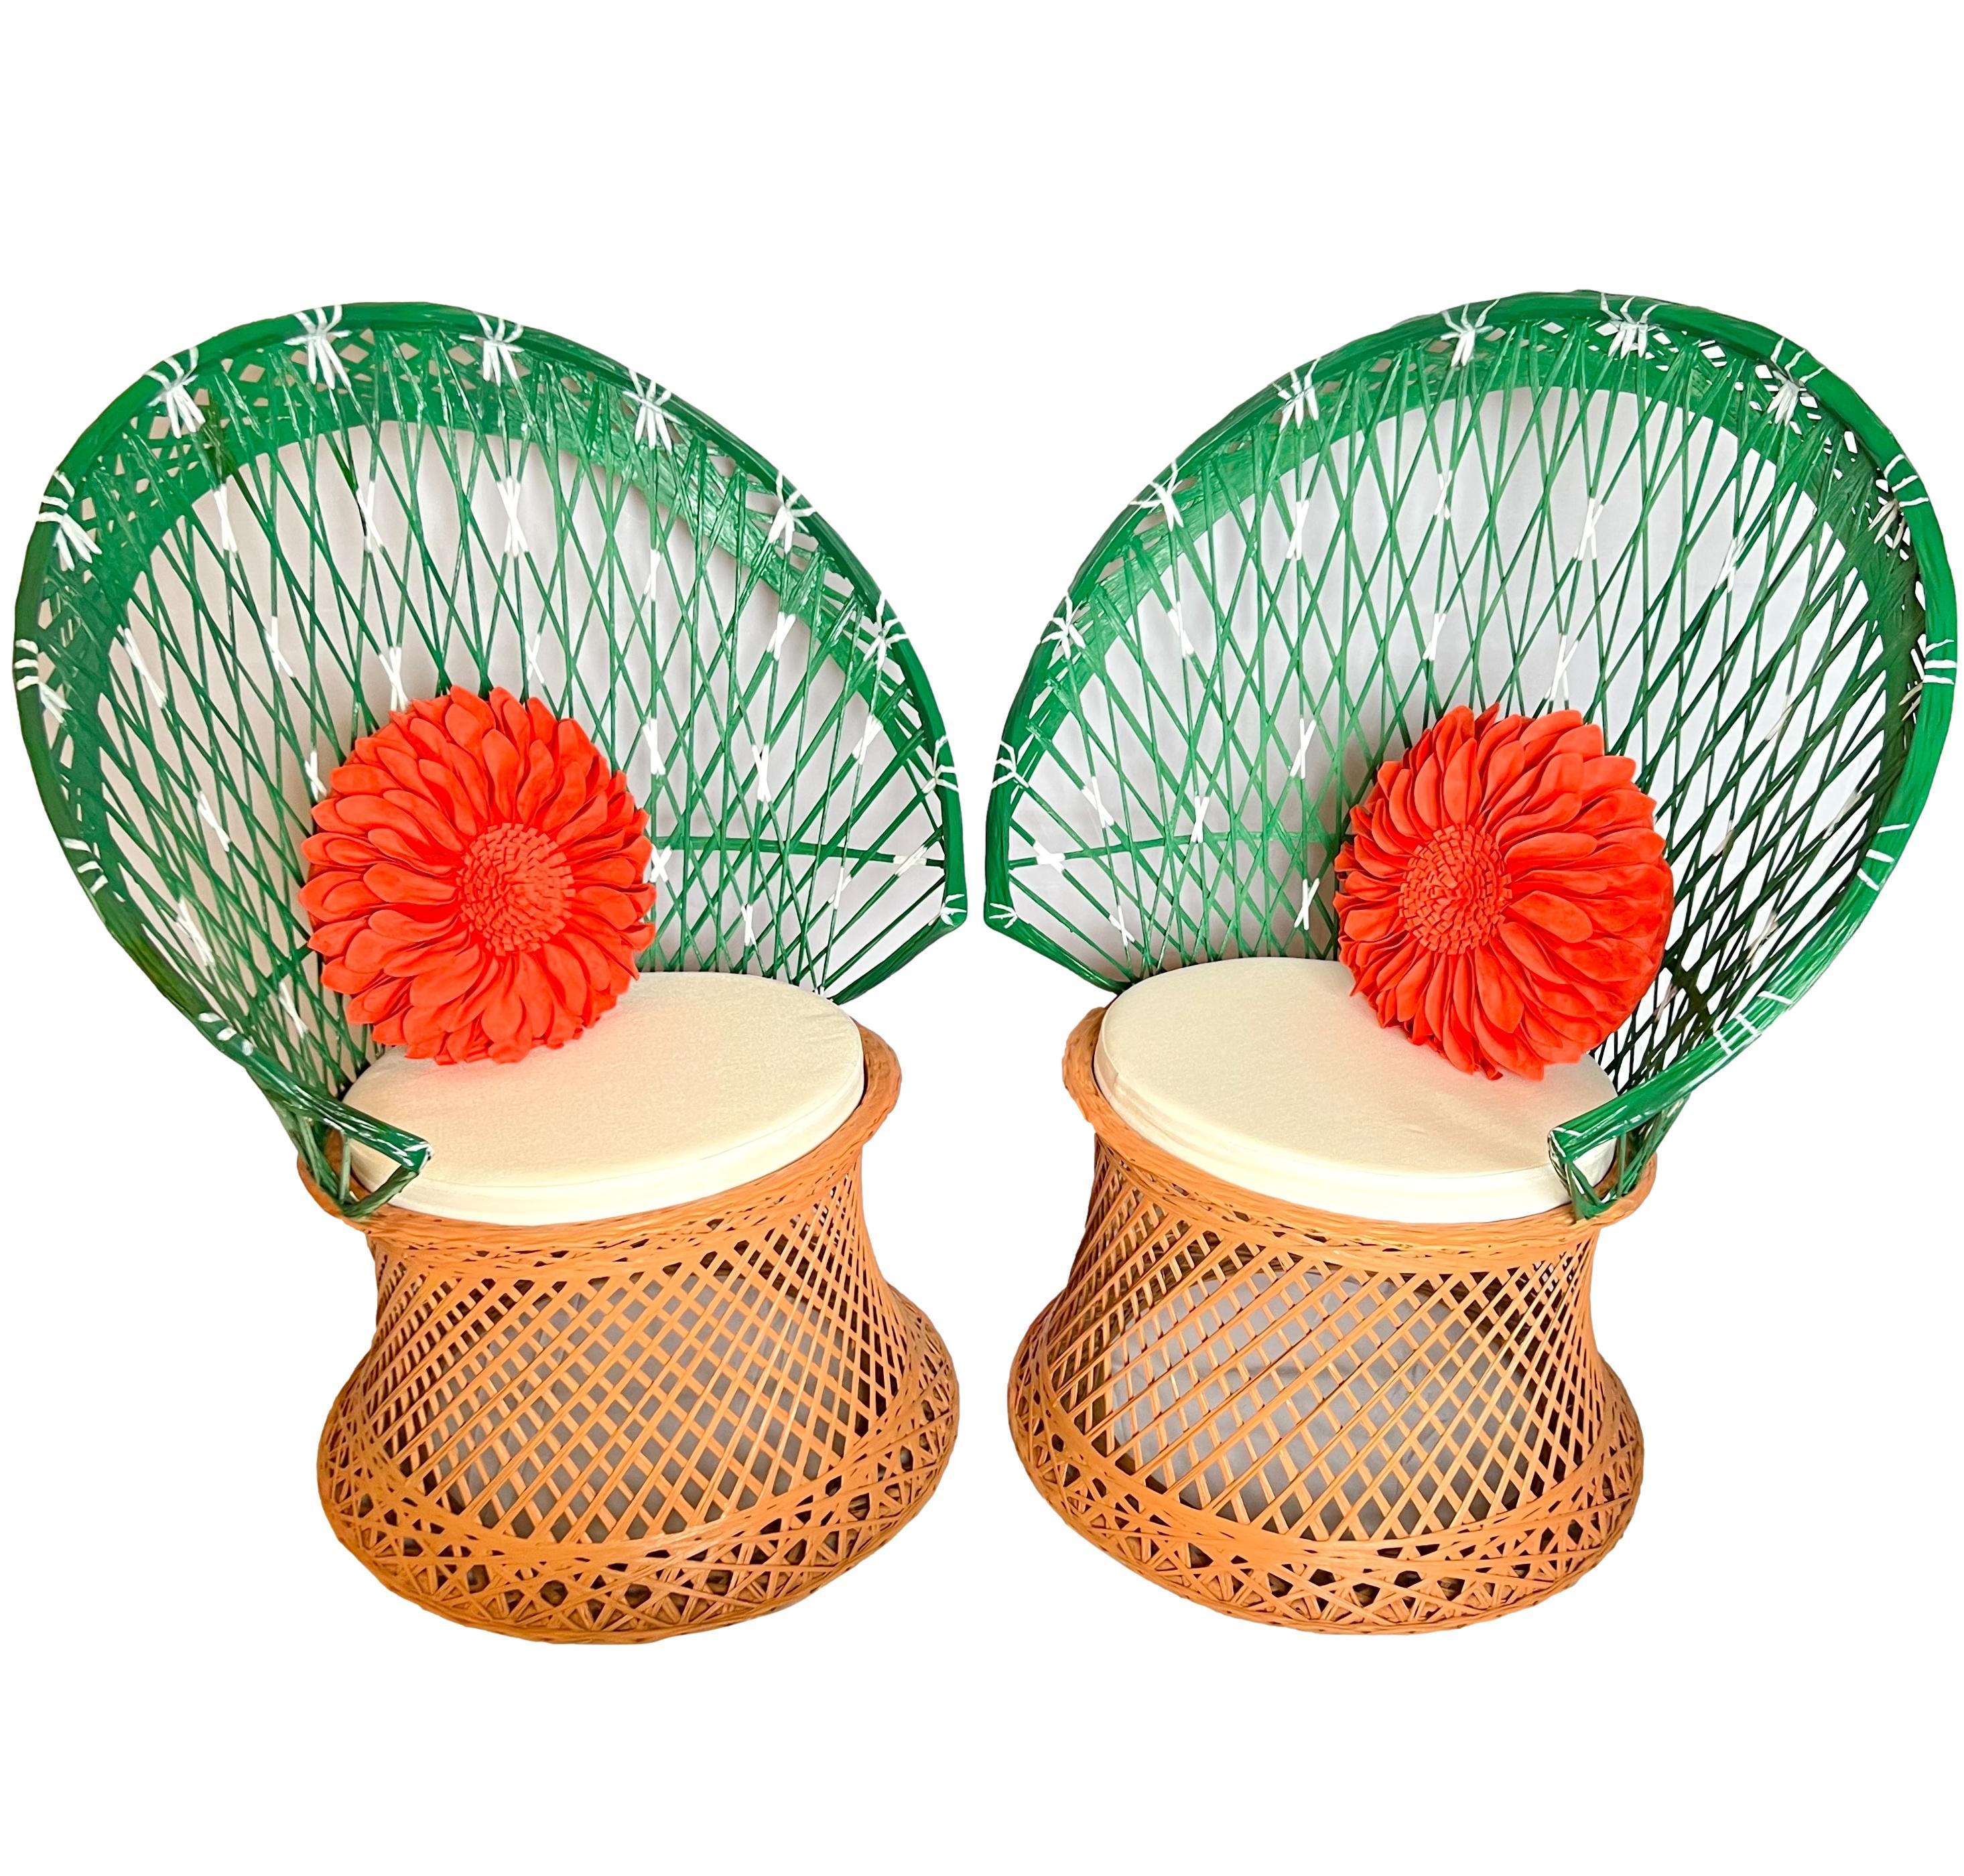 A pair of 1960's Mid-Century Modern Russell Woodard style spun fiberglass chairs.

Updated in a cactus theme motif featuring a terracotta color base and green upper with hand-painted white glochids (cactus prickles). Includes two round 18